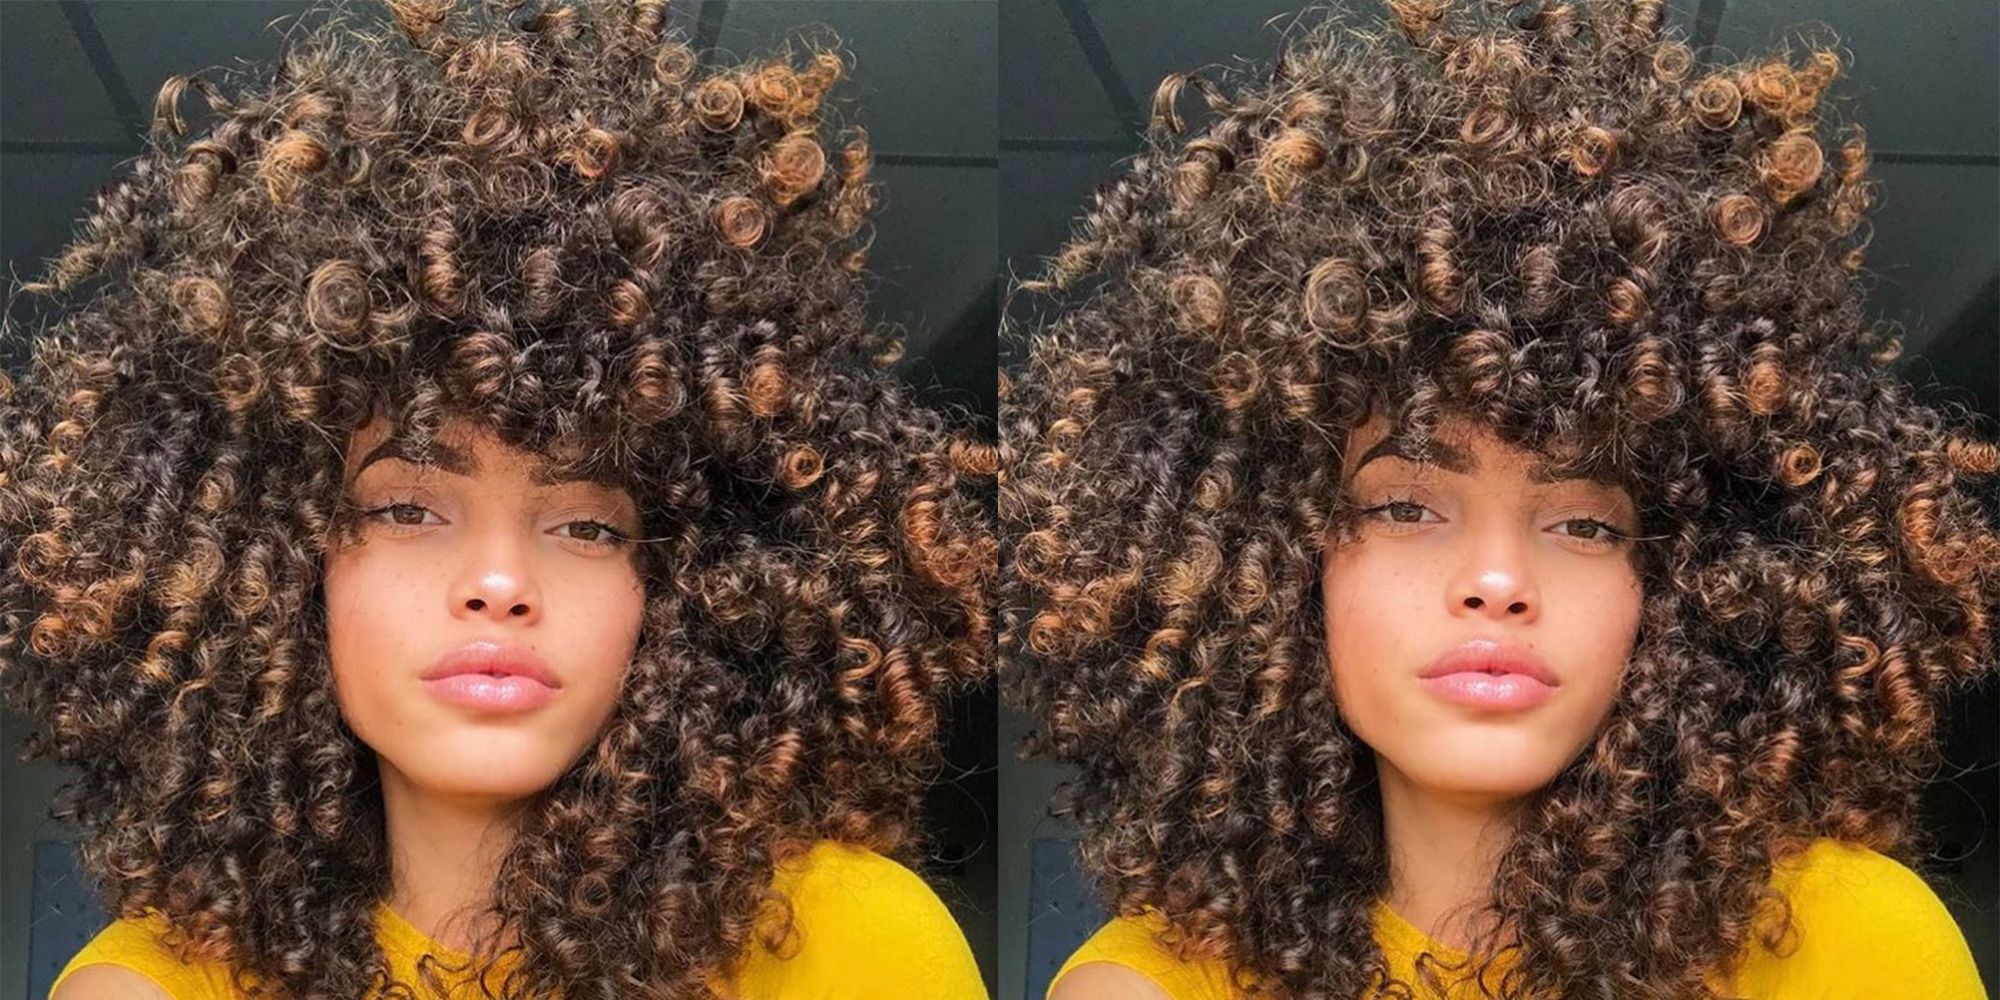 12 INSTAGRAM HAIRSTYLES FOR CURLY HAIR I COMPILATION  Look At Her Hair